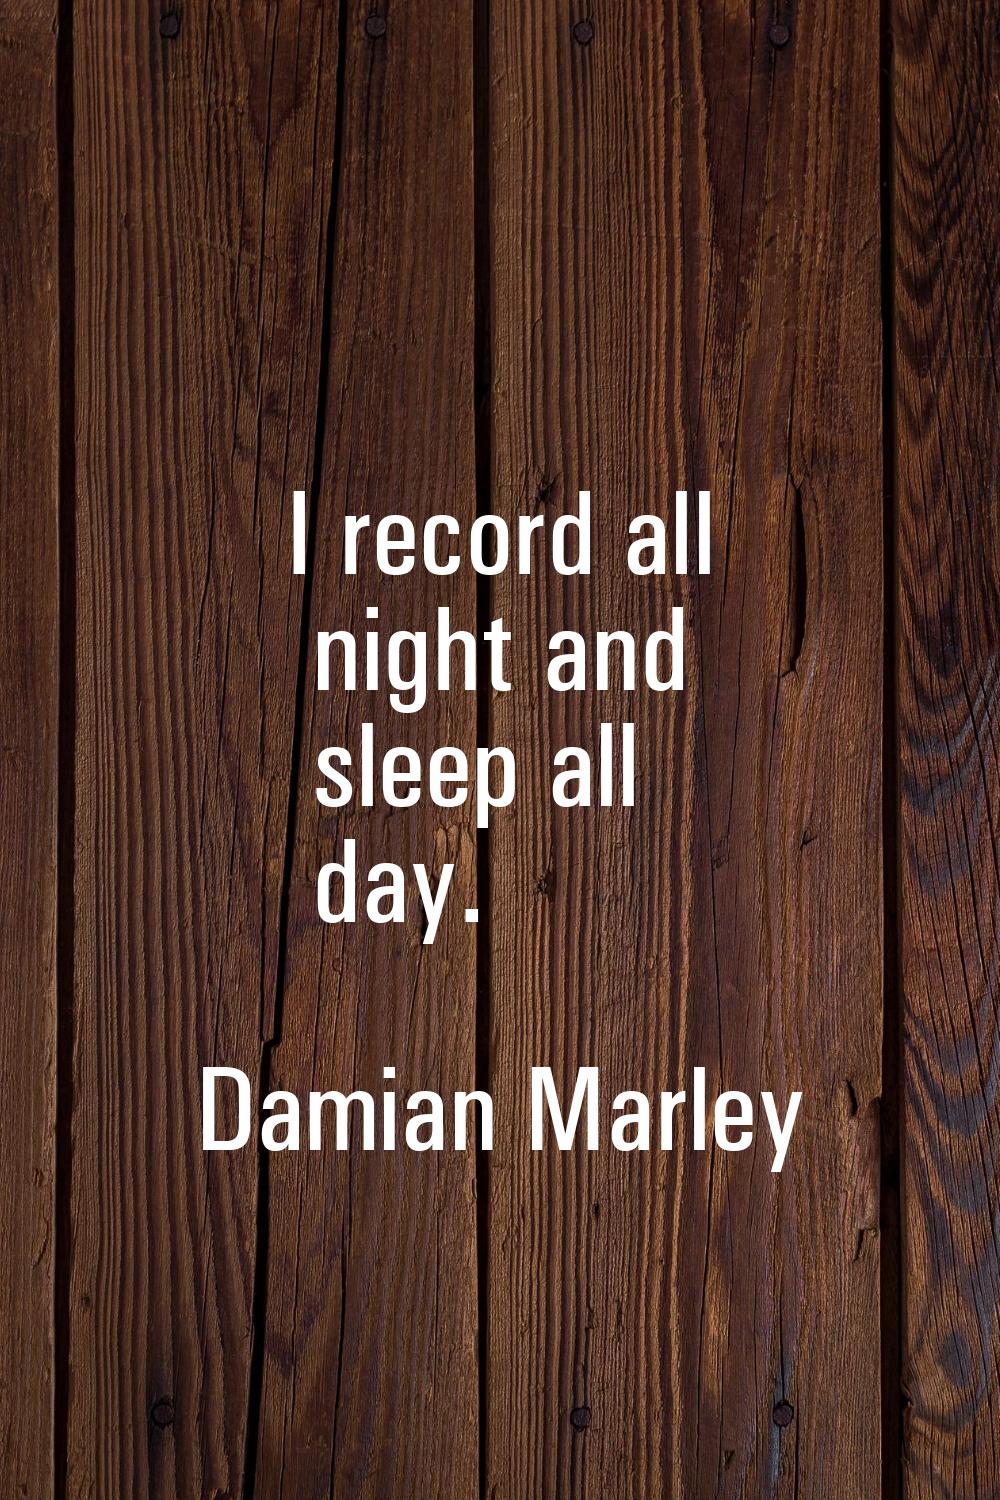 I record all night and sleep all day.